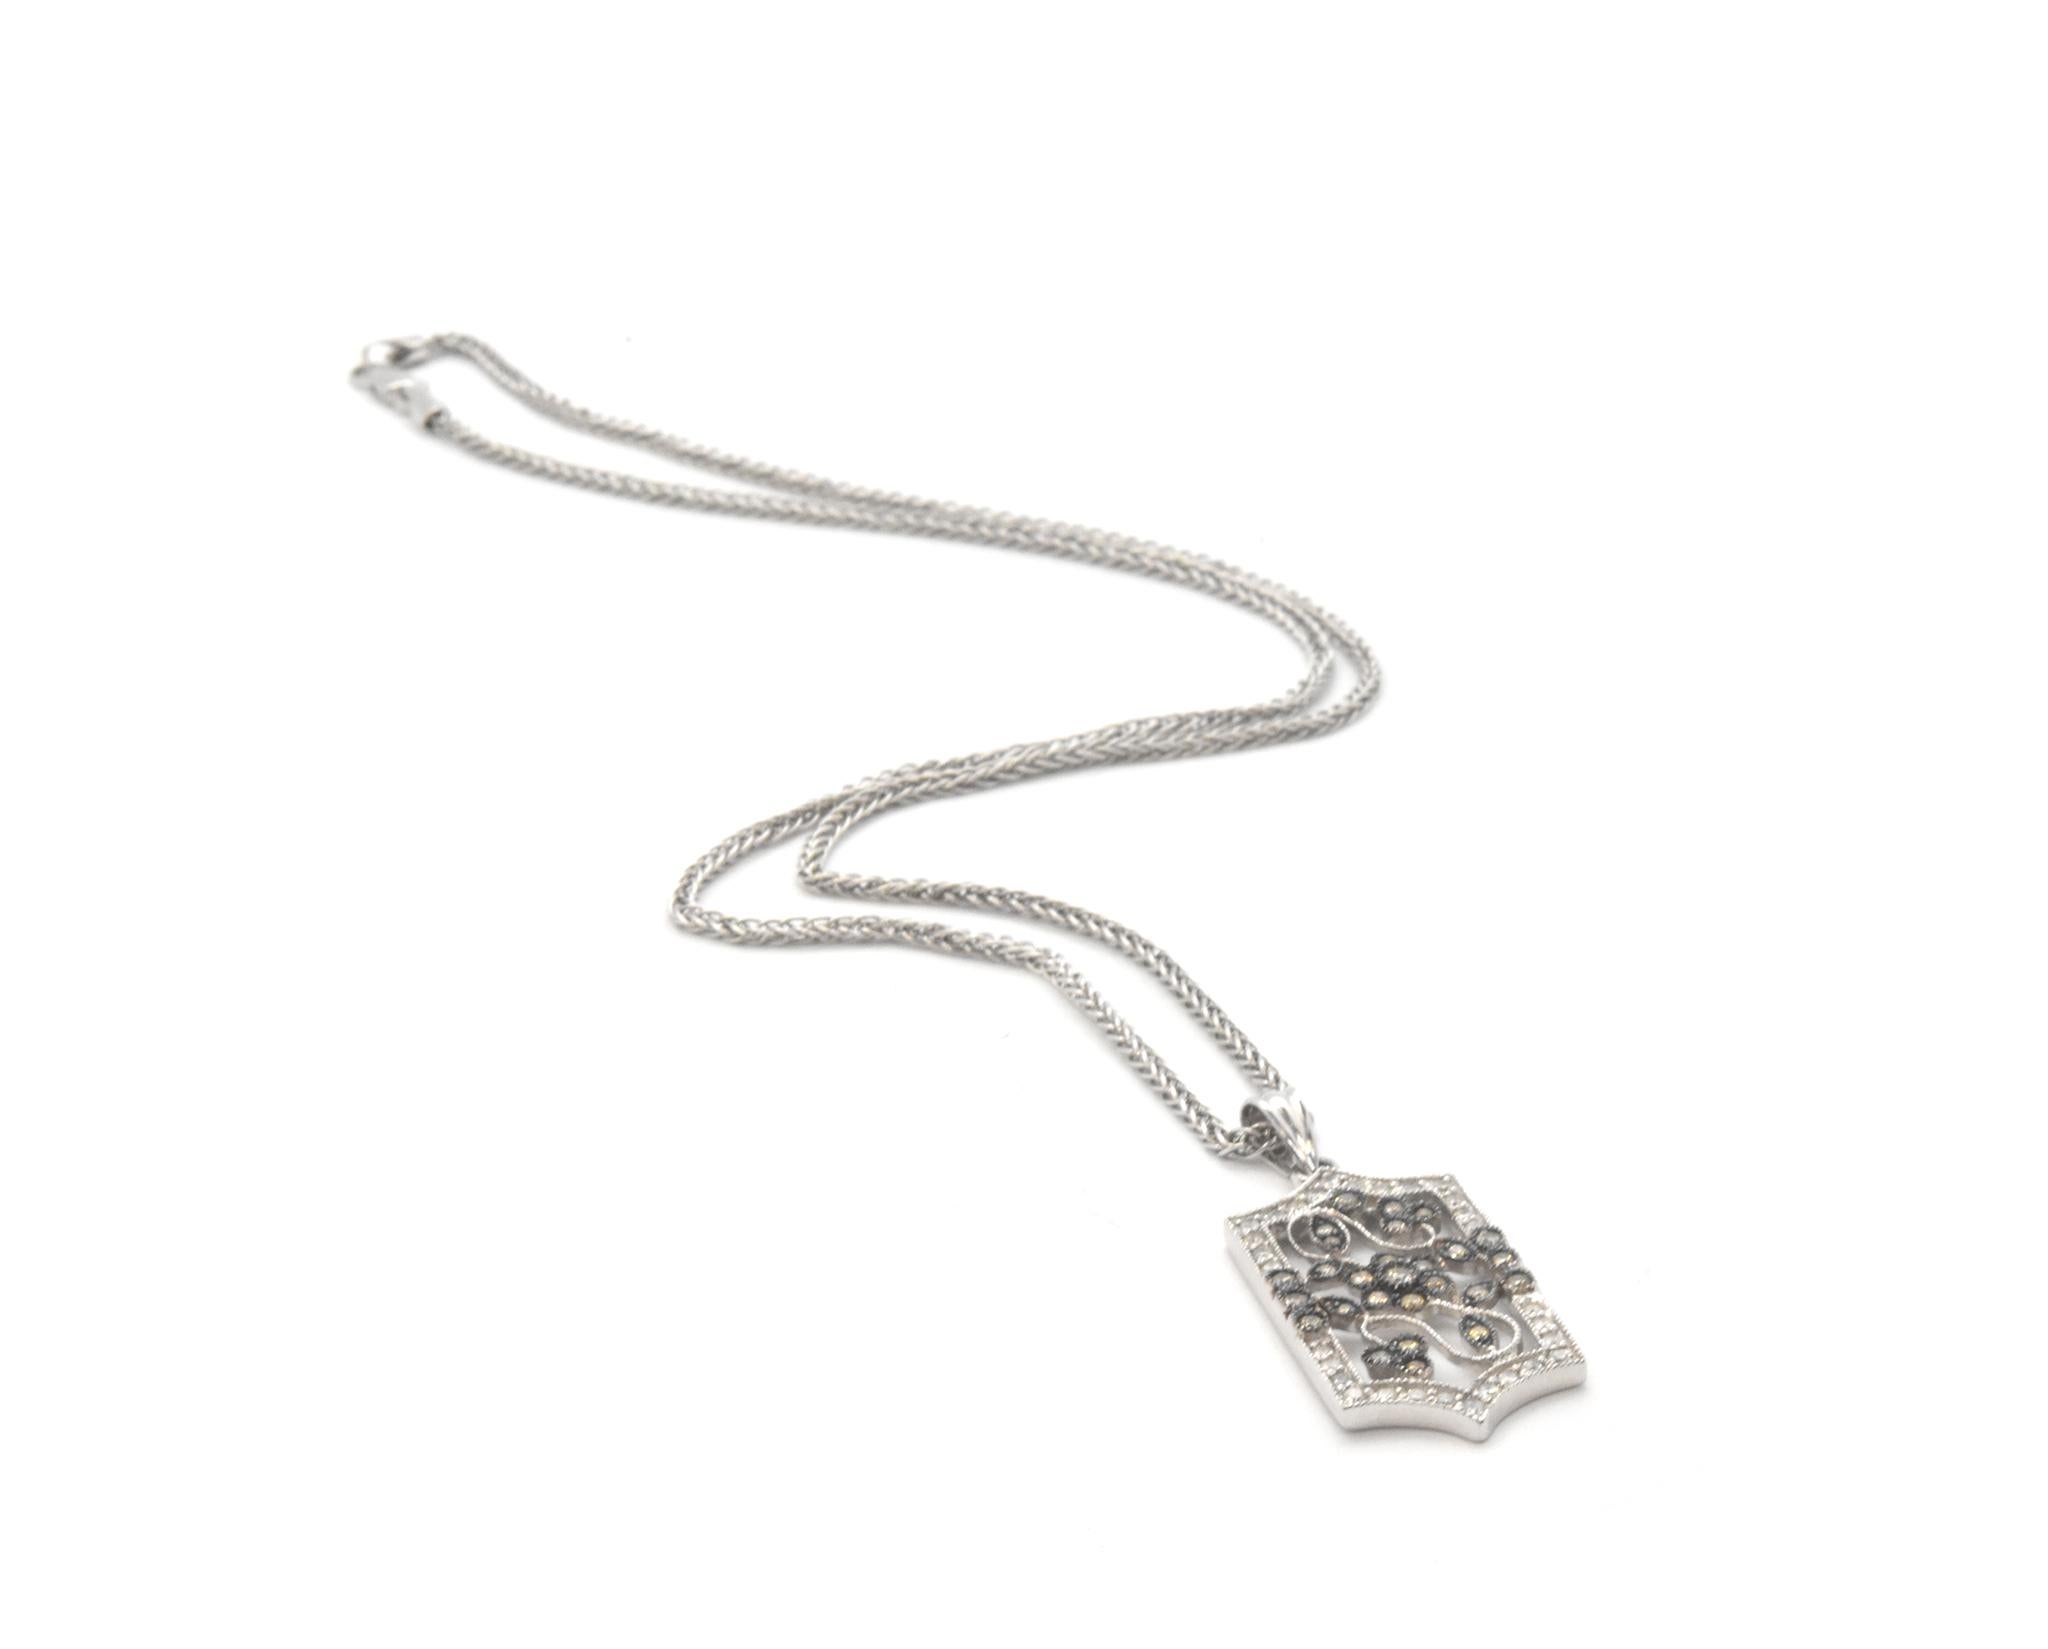 This gorgeous 14k necklace features a pendant with white and cognac diamonds set into 14k white gold. The diamonds have a total weight of 1.10 carats, and the white diamonds are graded H in color and I in clarity. The pendant measures 38x16mm. The